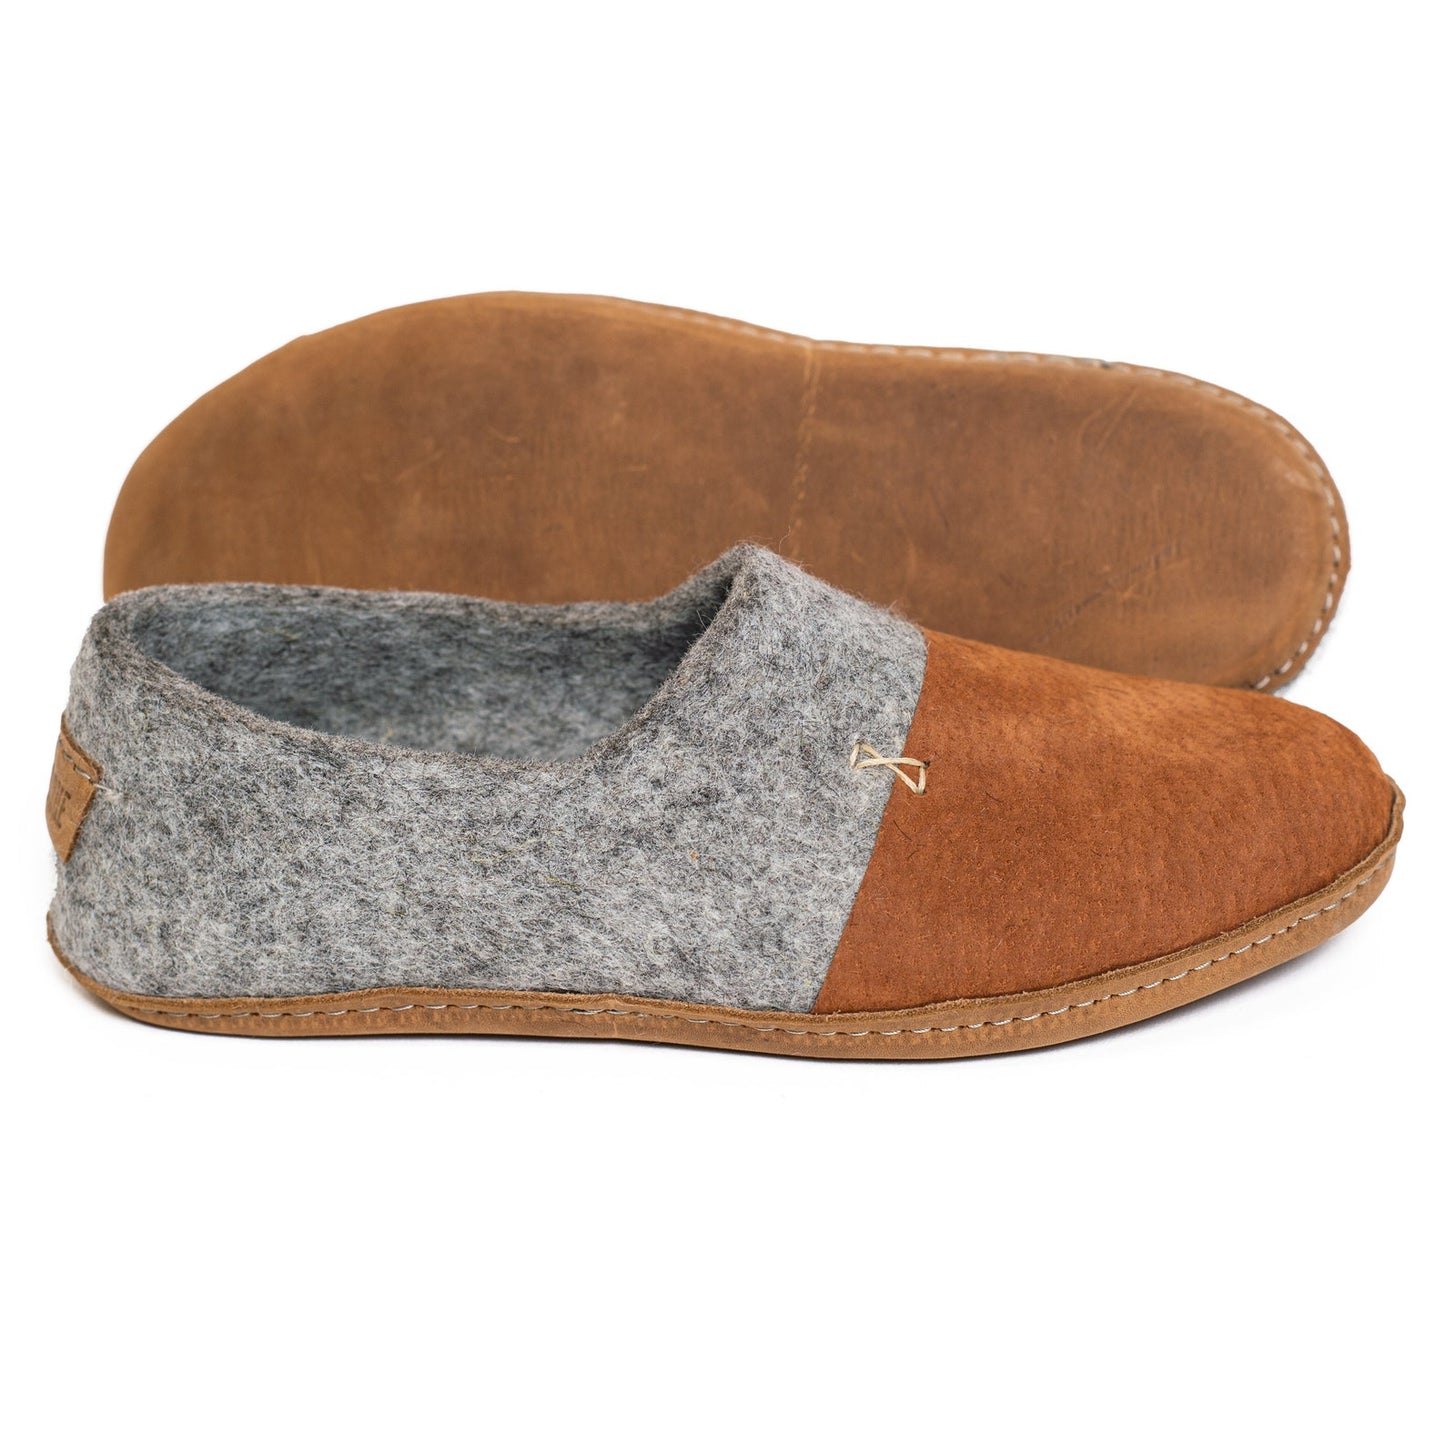 [felted_slippers],[wool_slippers], [burebure_slippers], [warm_wool_slippers], Grey WOOCAPS Clogs for Men, Bure Bure wool slippers